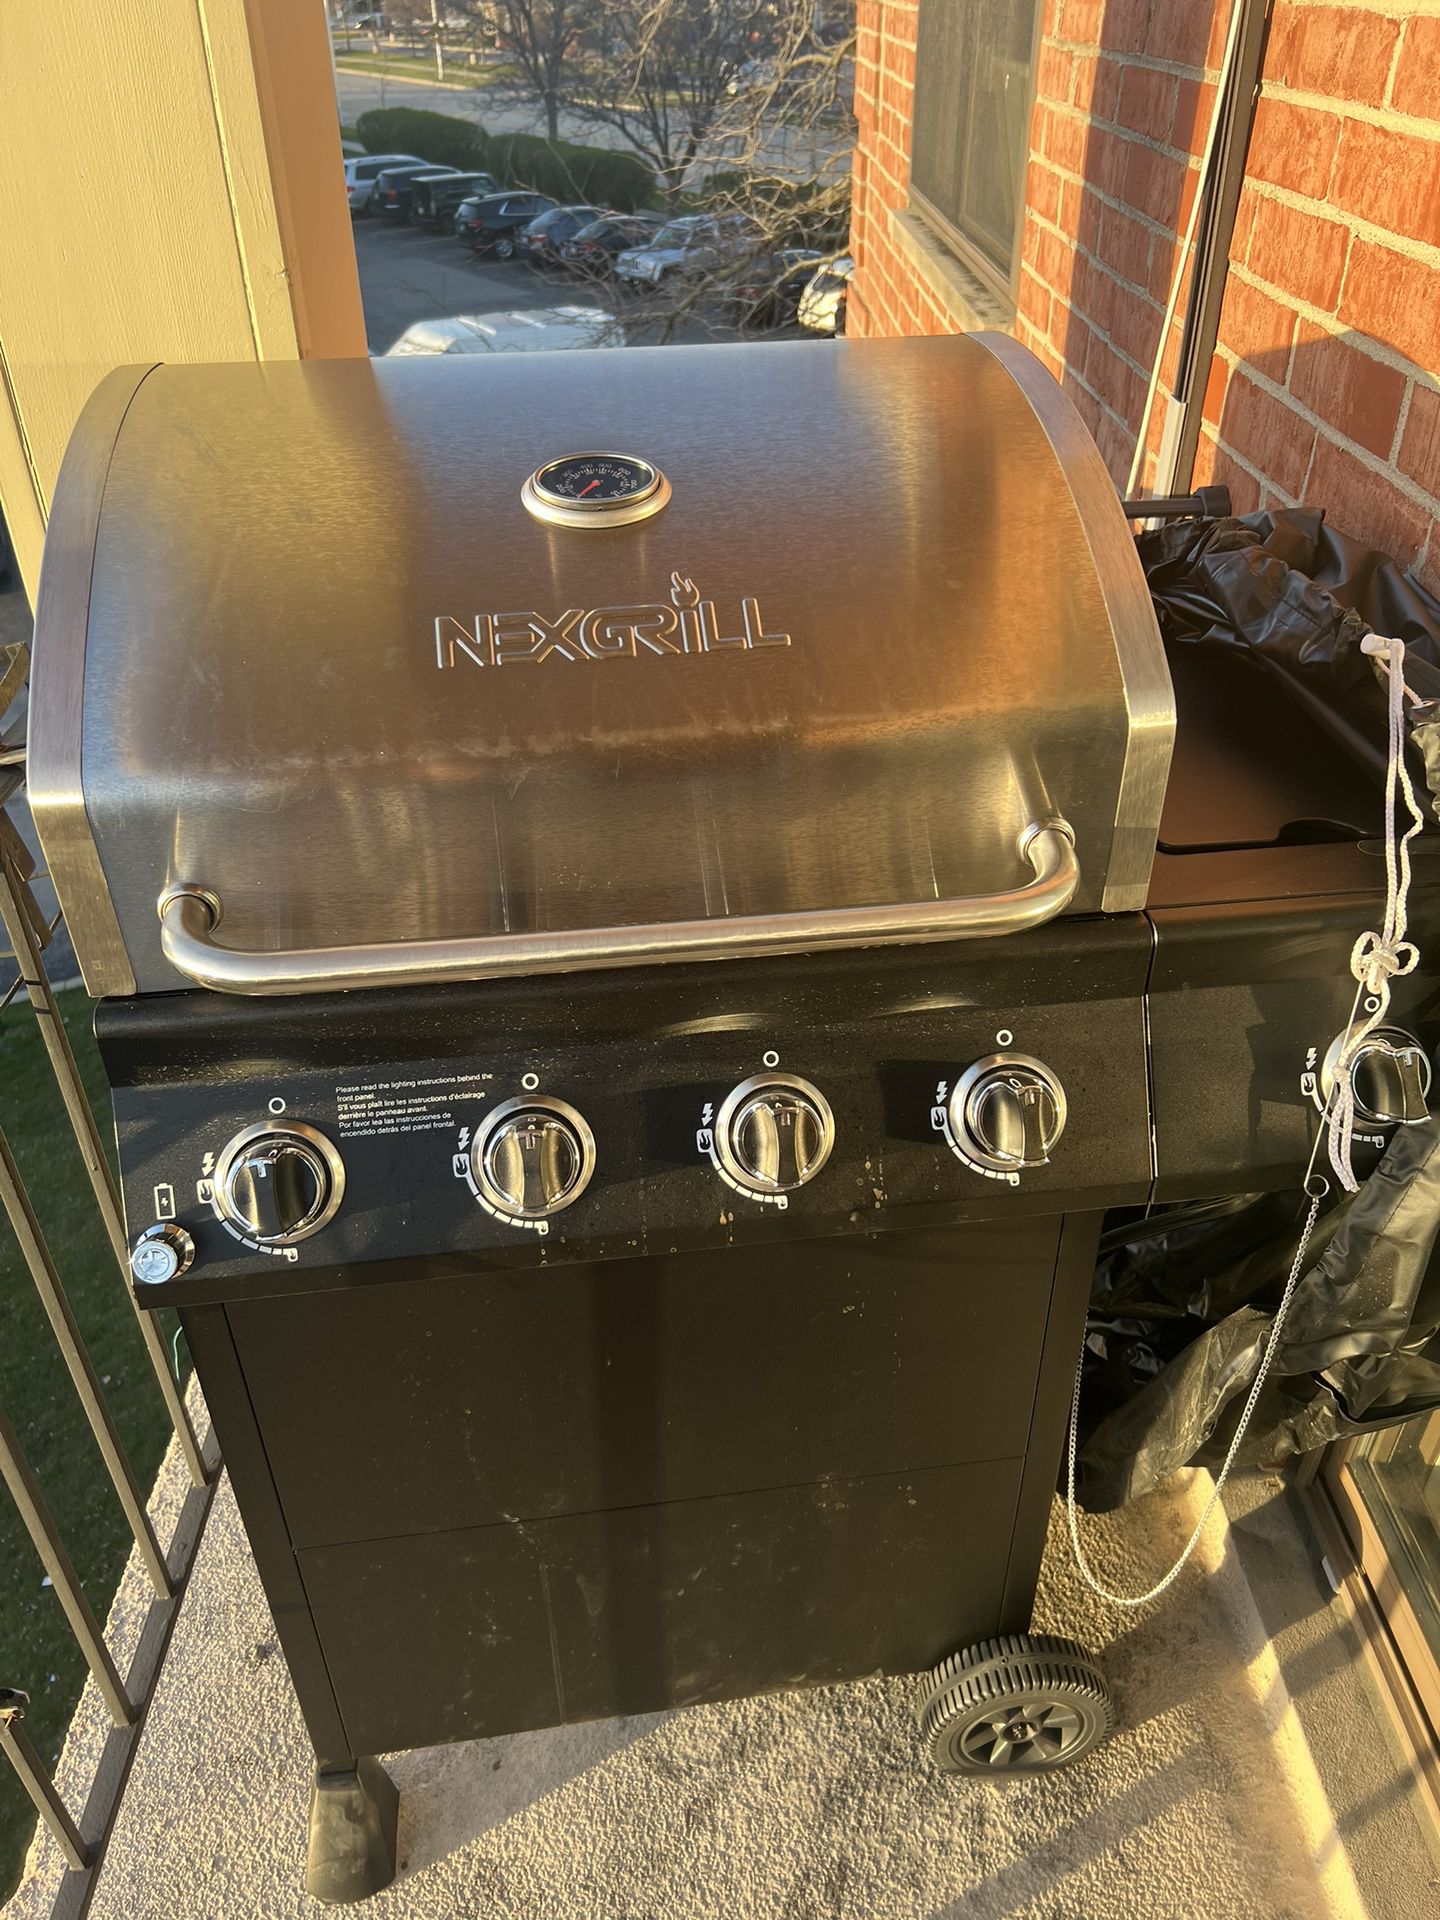 Grill, BBQ, With Gas Ballon